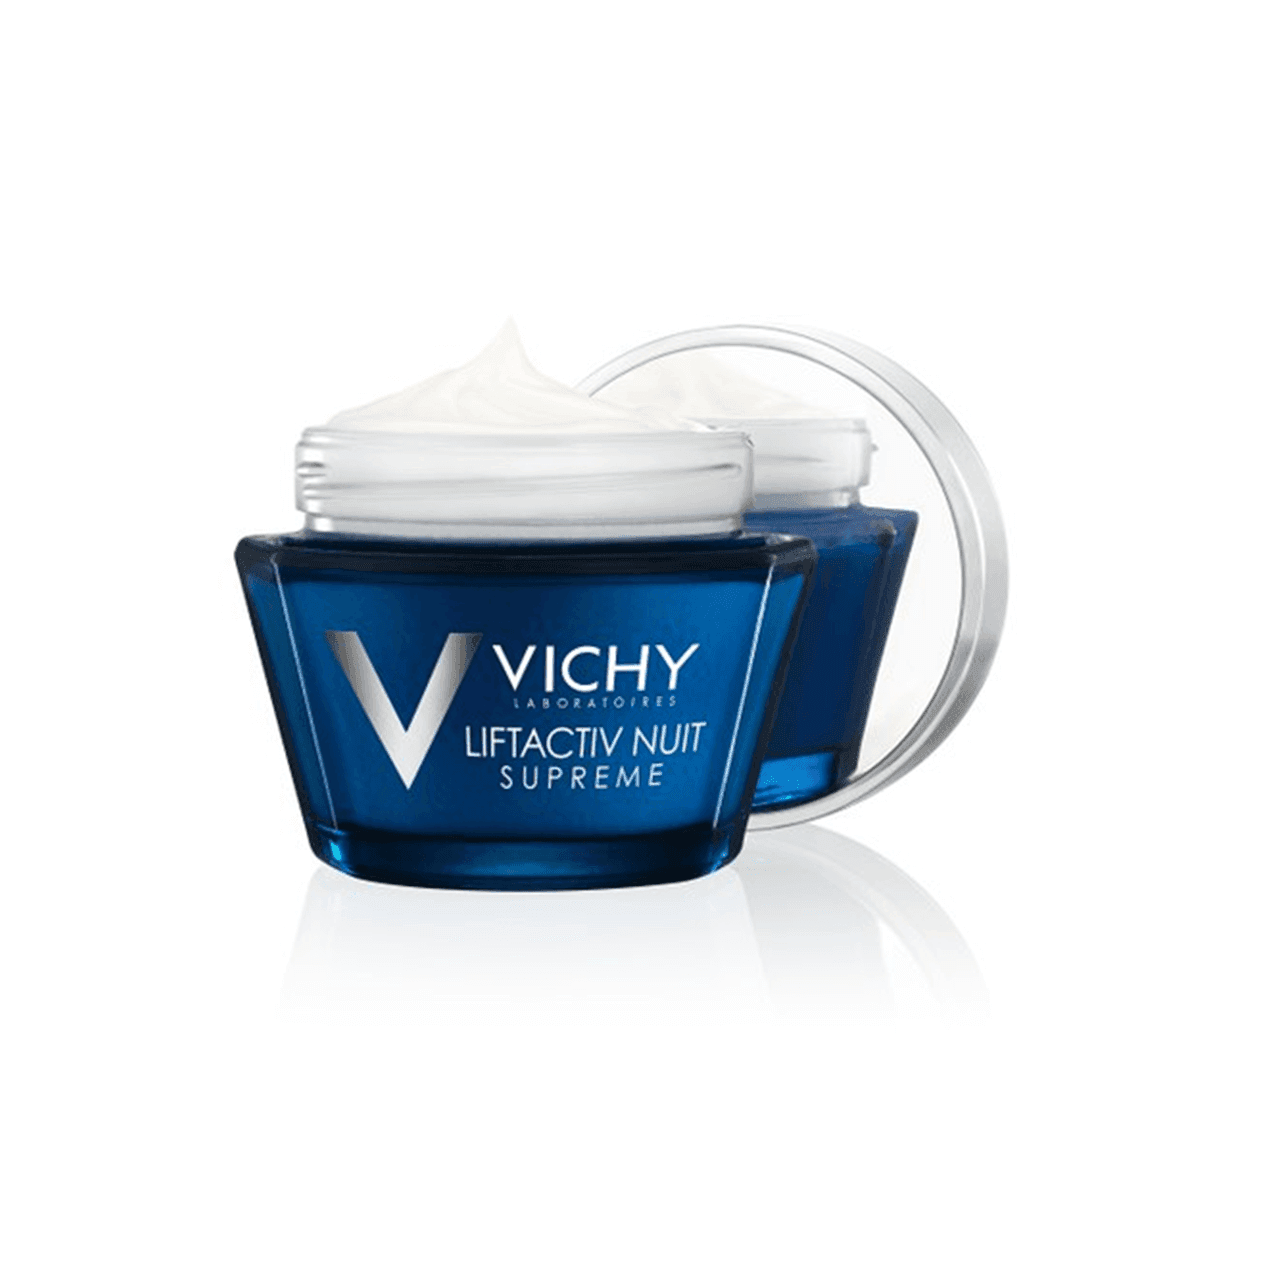 LiftActiv Complete Anti-Wrinkle & Firming Care Cream